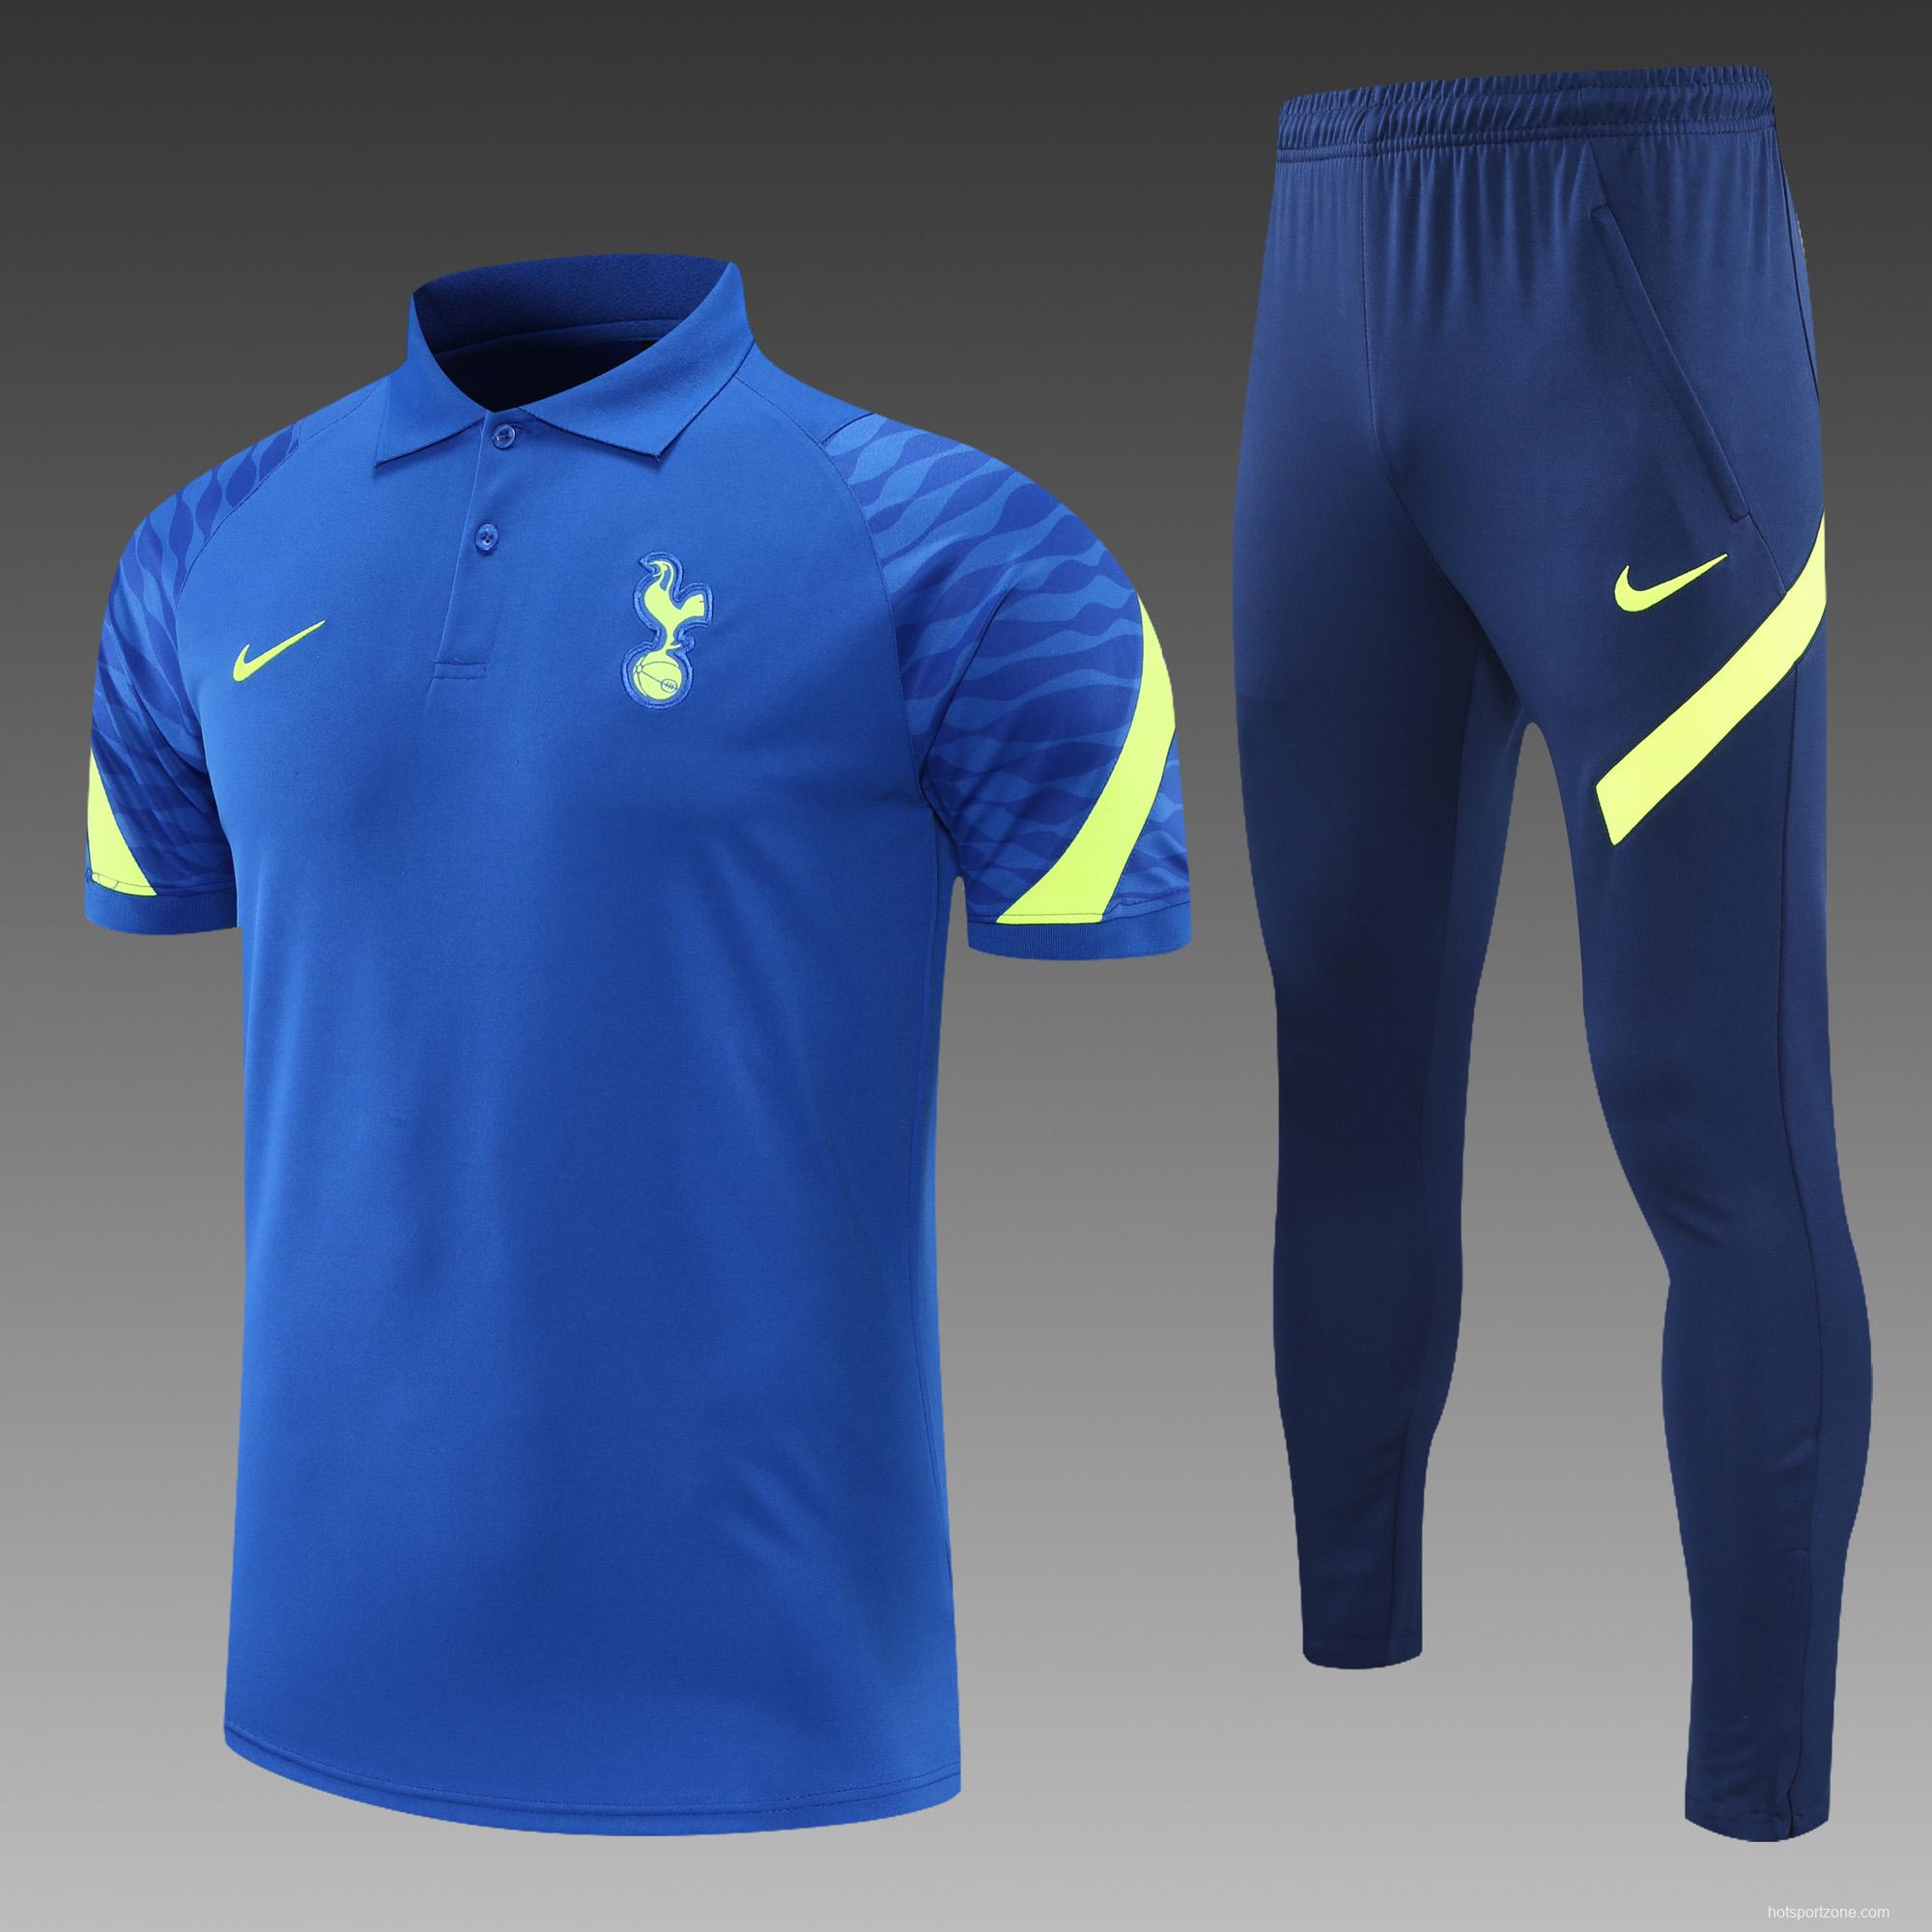 Tottenham Hotspur POLO kit Blue(not supported to be sold separately)